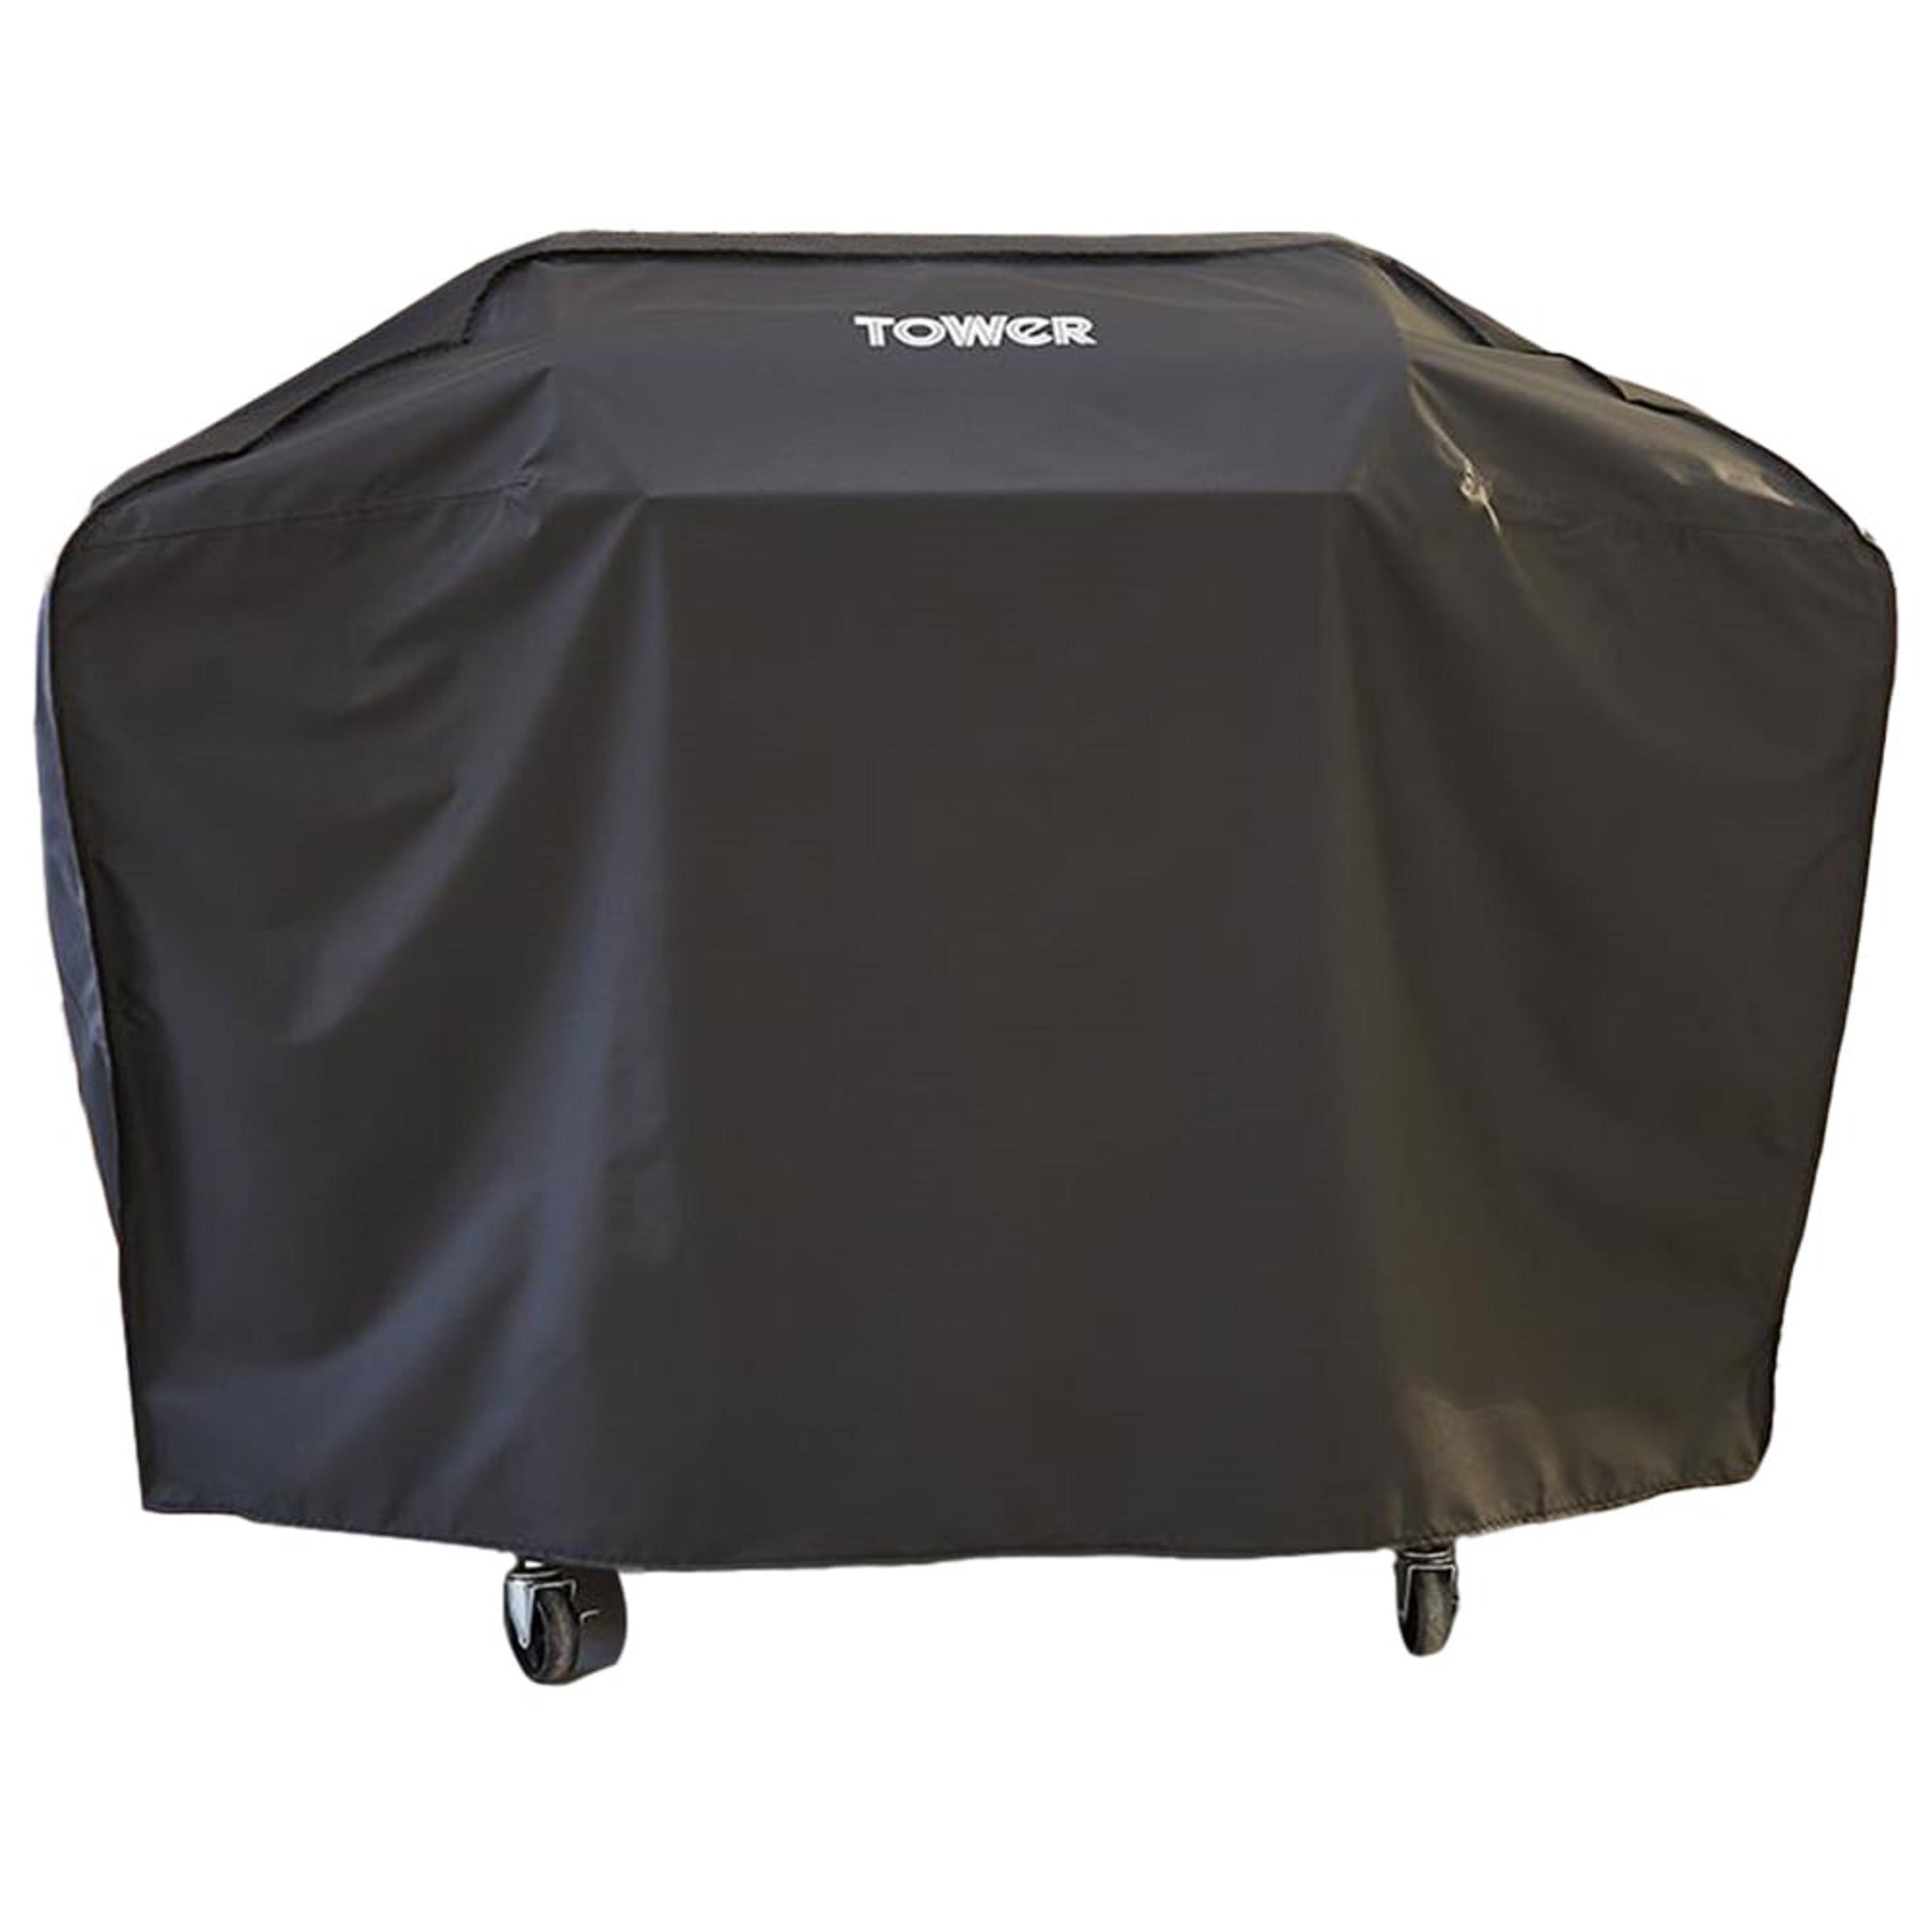 Tower Stealth Pro Six Burner BBQ Cover